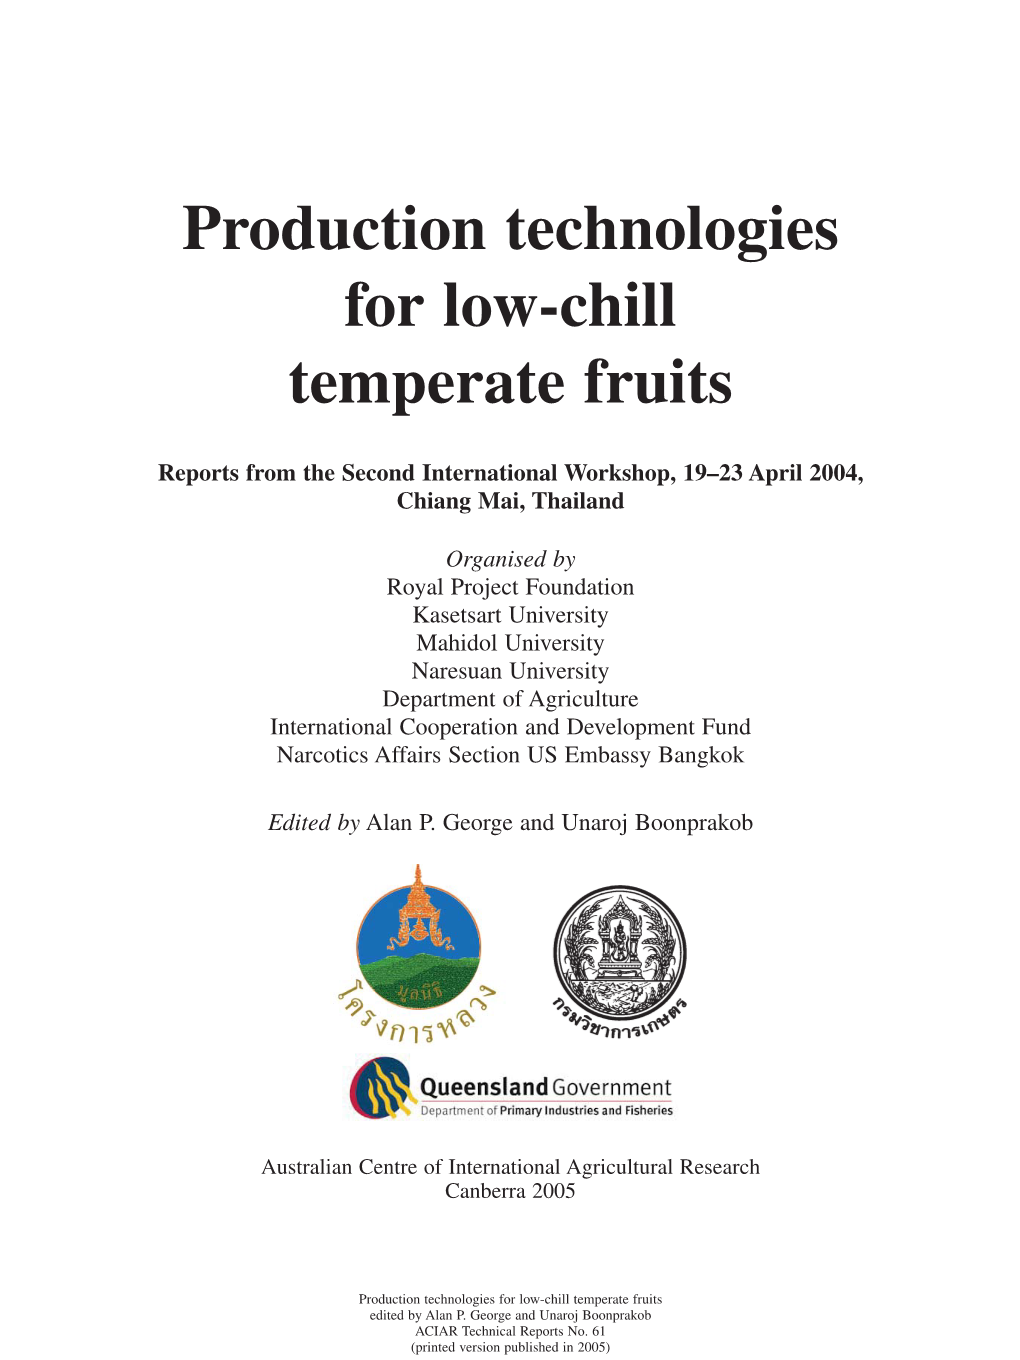 Production Technologies for Low-Chill Temperate Fruits